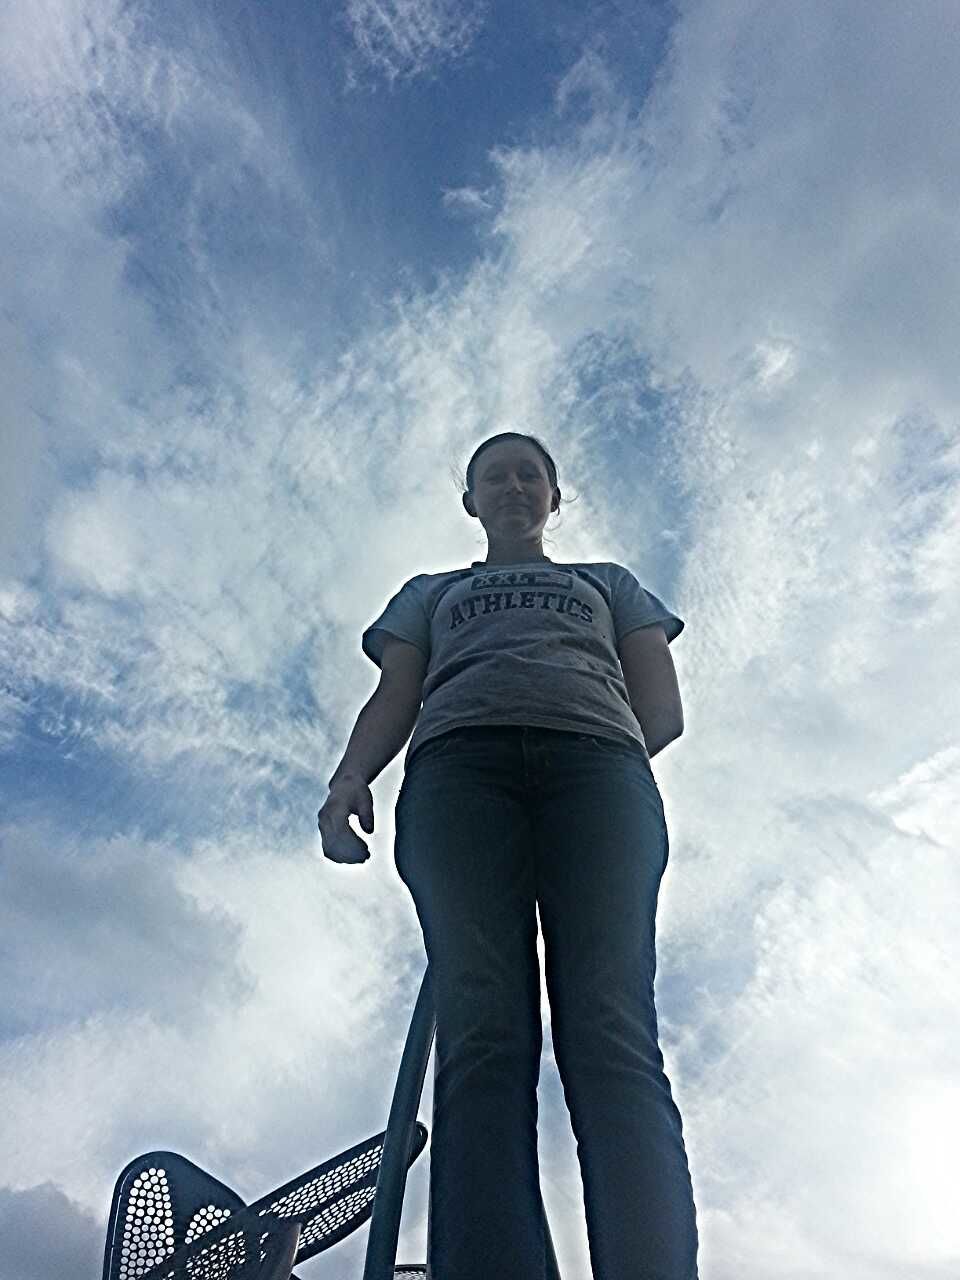 sky, low angle view, cloud - sky, standing, lifestyles, leisure activity, cloud, cloudy, men, three quarter length, rear view, waist up, blue, day, outdoors, casual clothing, nature, silhouette